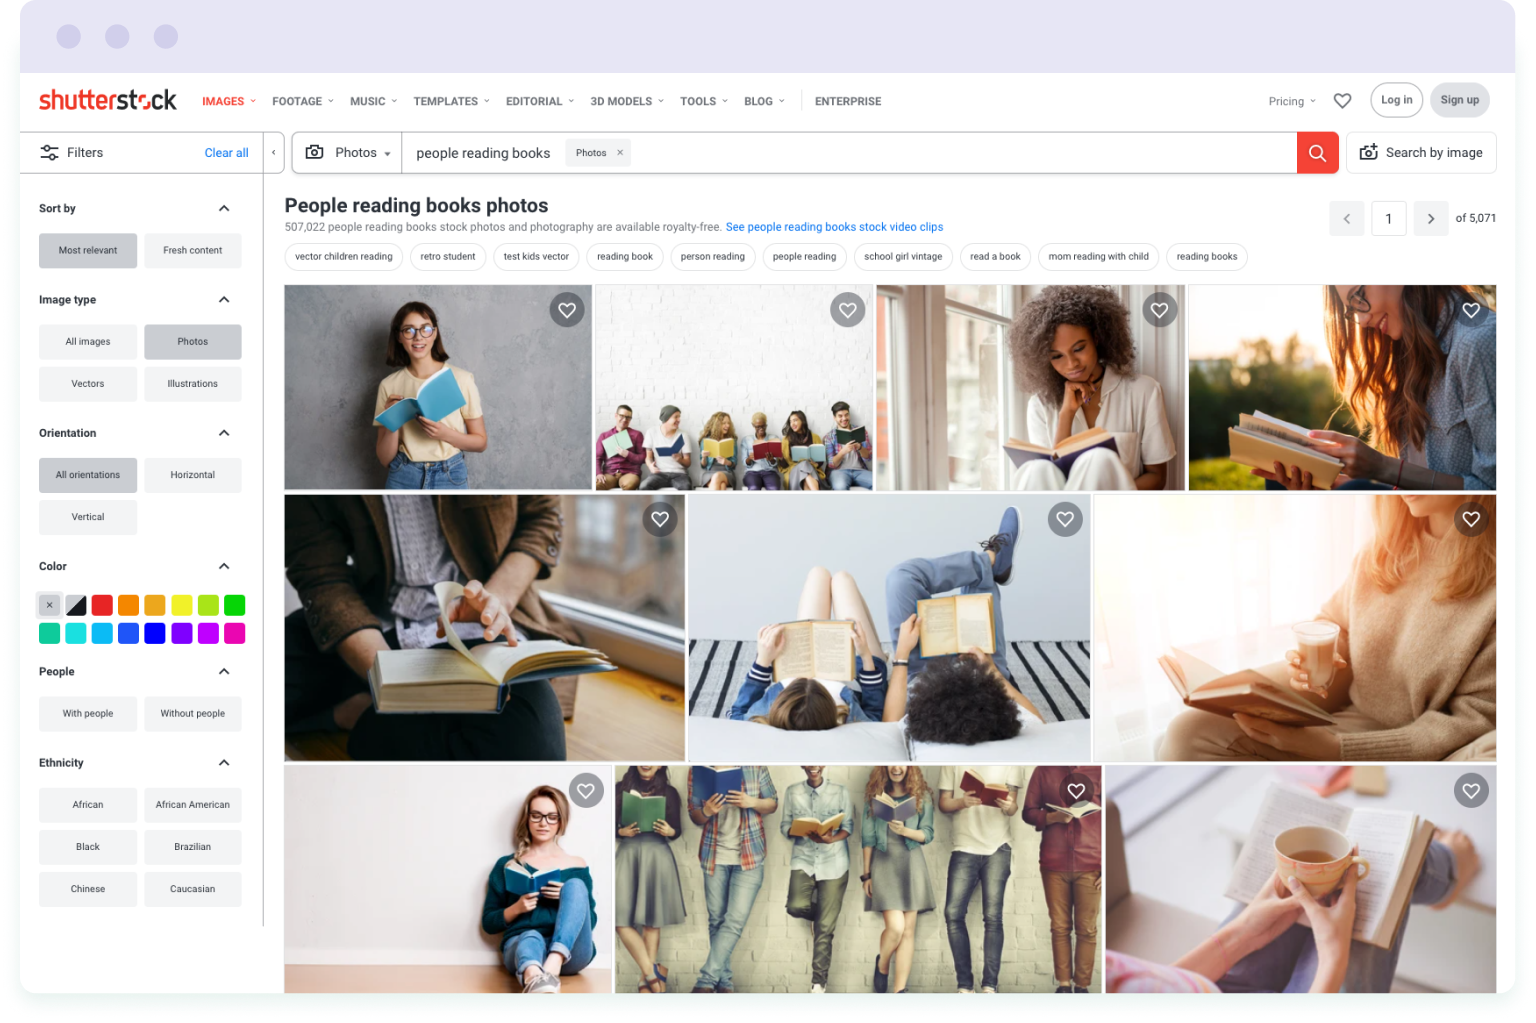 You can find images of objects and people on Shutterstock to use in your email marketing campaigns